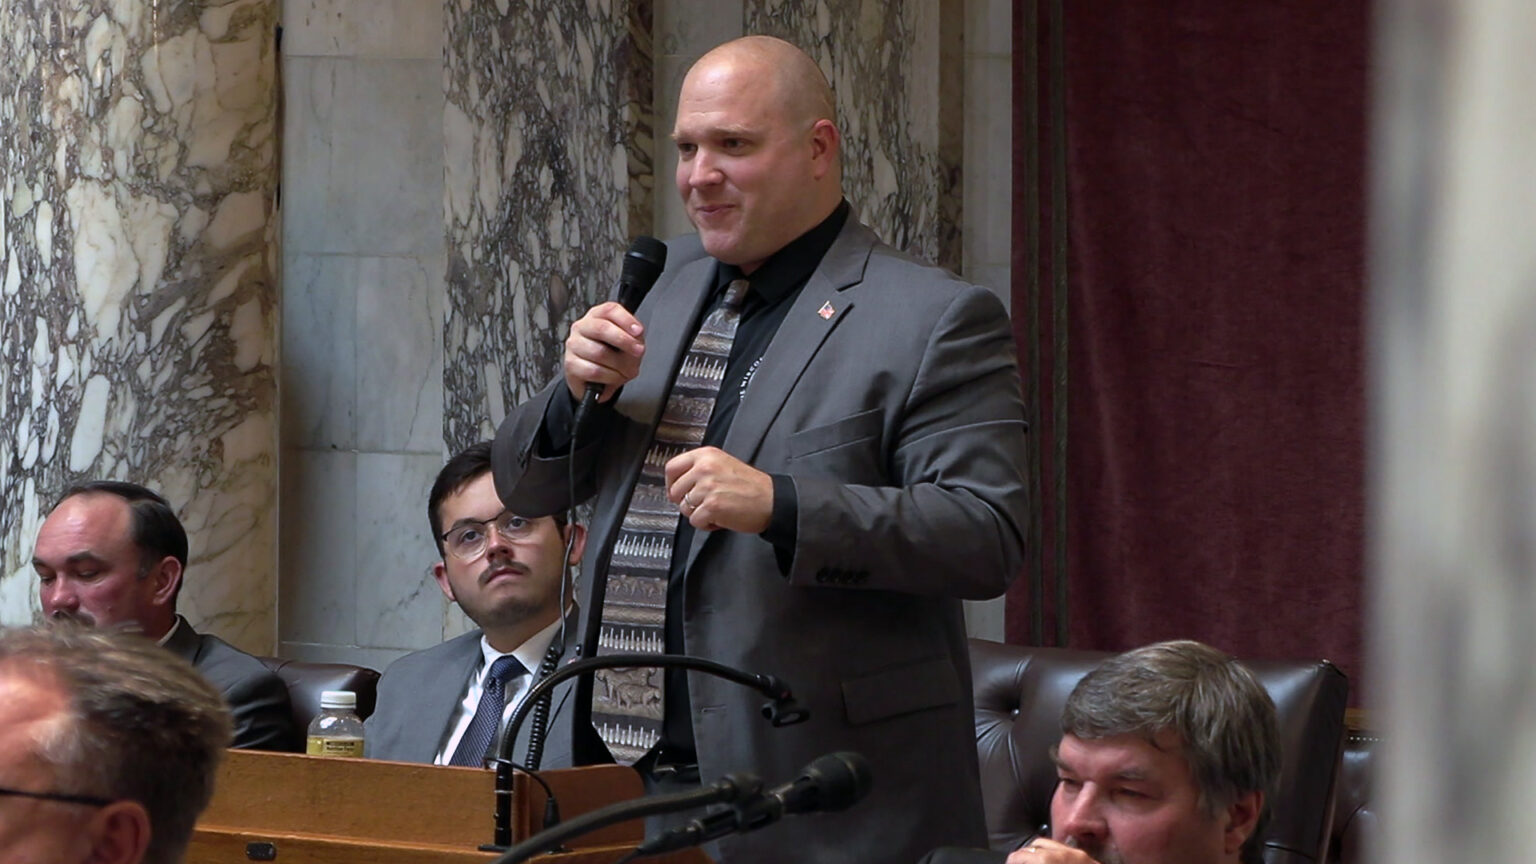 Shae Sortwell stands and speaks while holding a microphone in his right hand, with other people seated in front of and behind him, in a room with marble pillars and masonry.